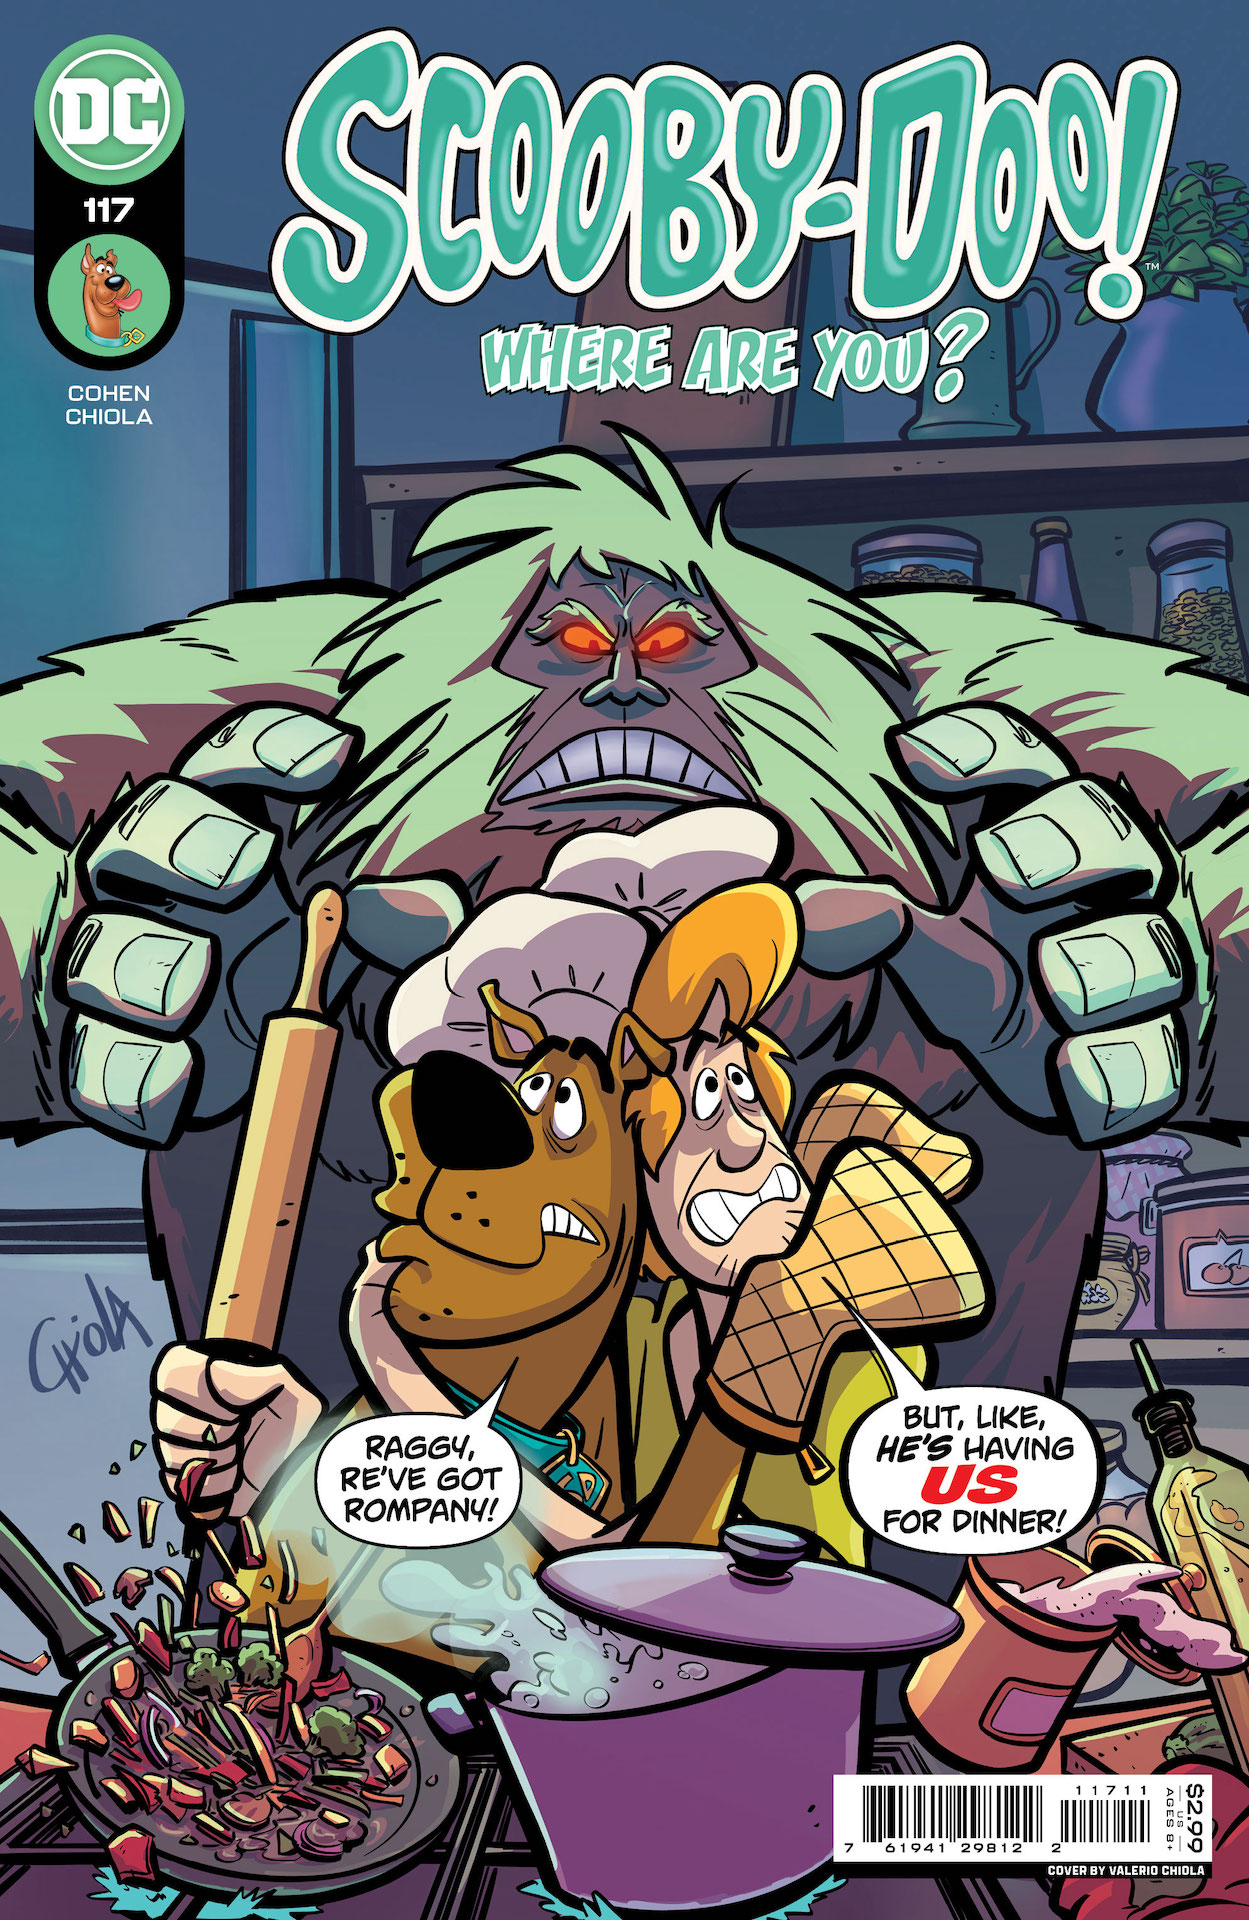 DC Preview: Scooby-Doo, Where Are You? #117